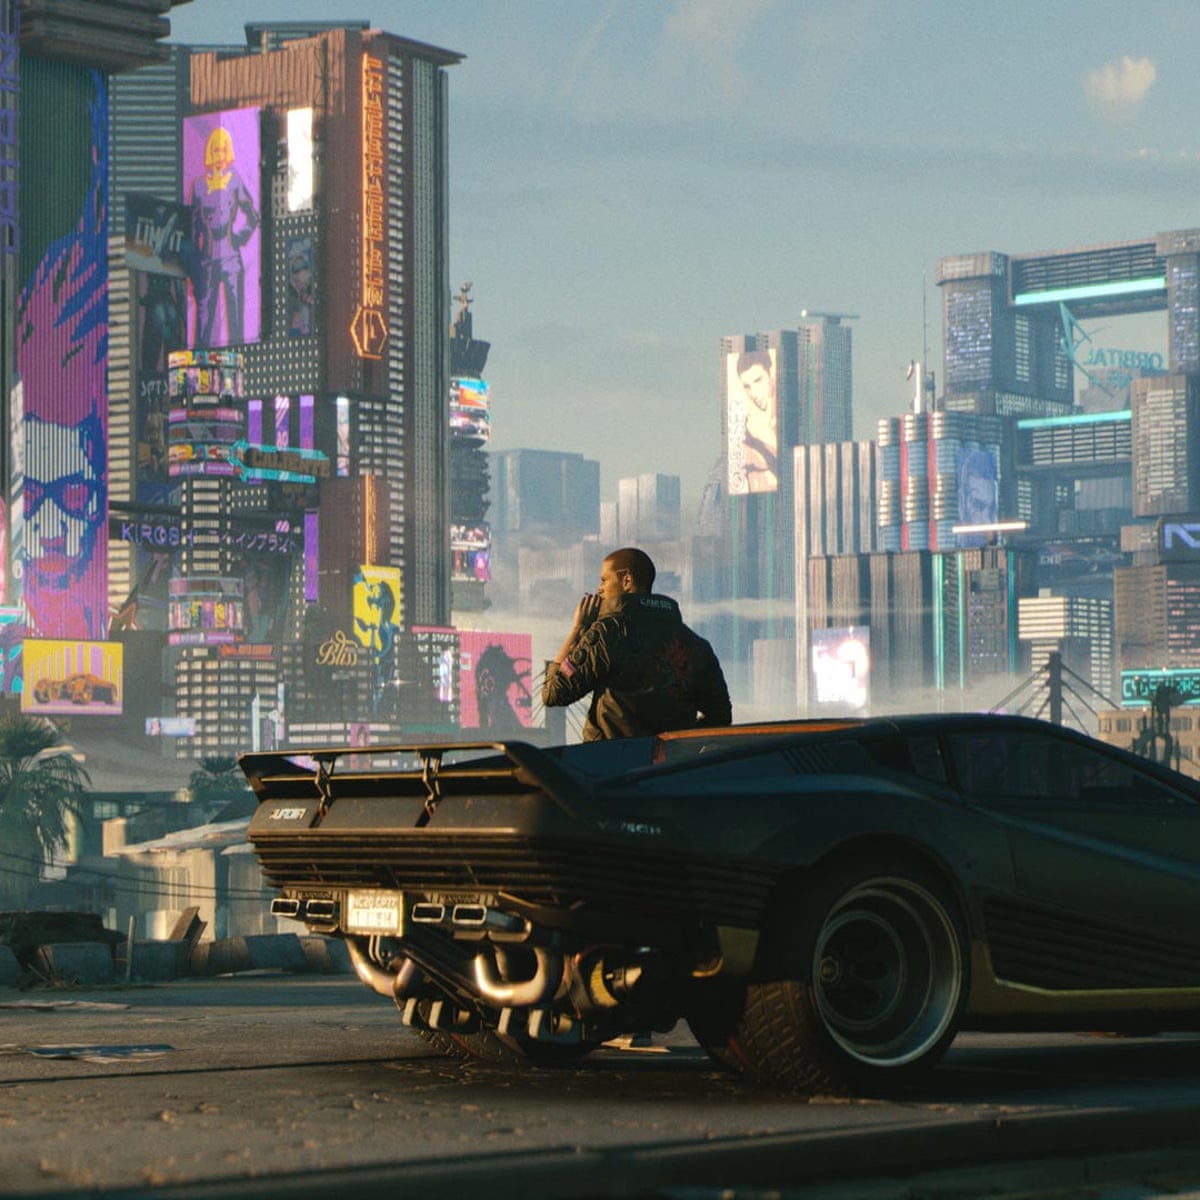 Check Out This Commentary-Free Gameplay Footage of Cyberpunk 2077